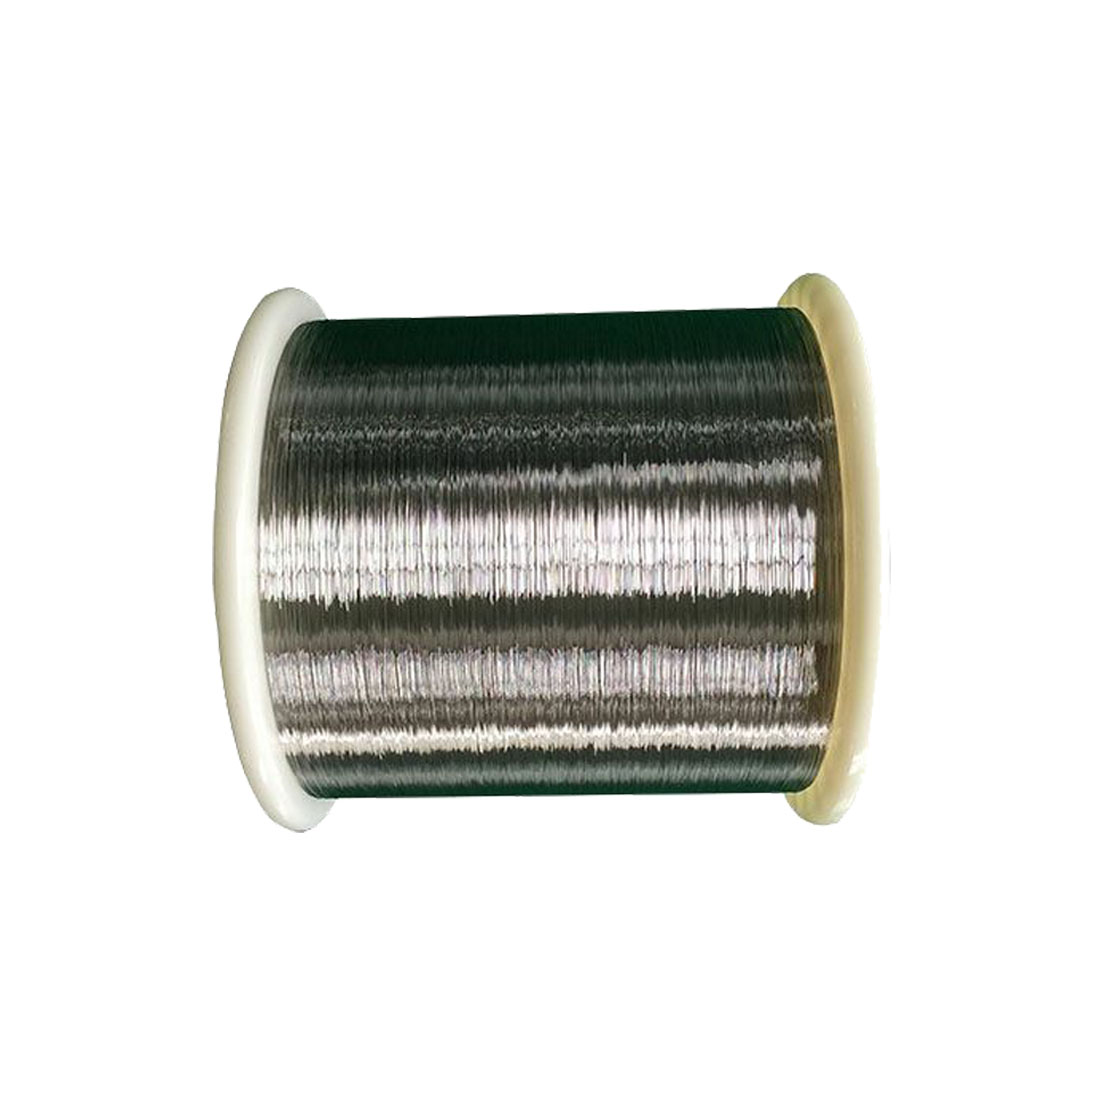 nickel plated copper wire